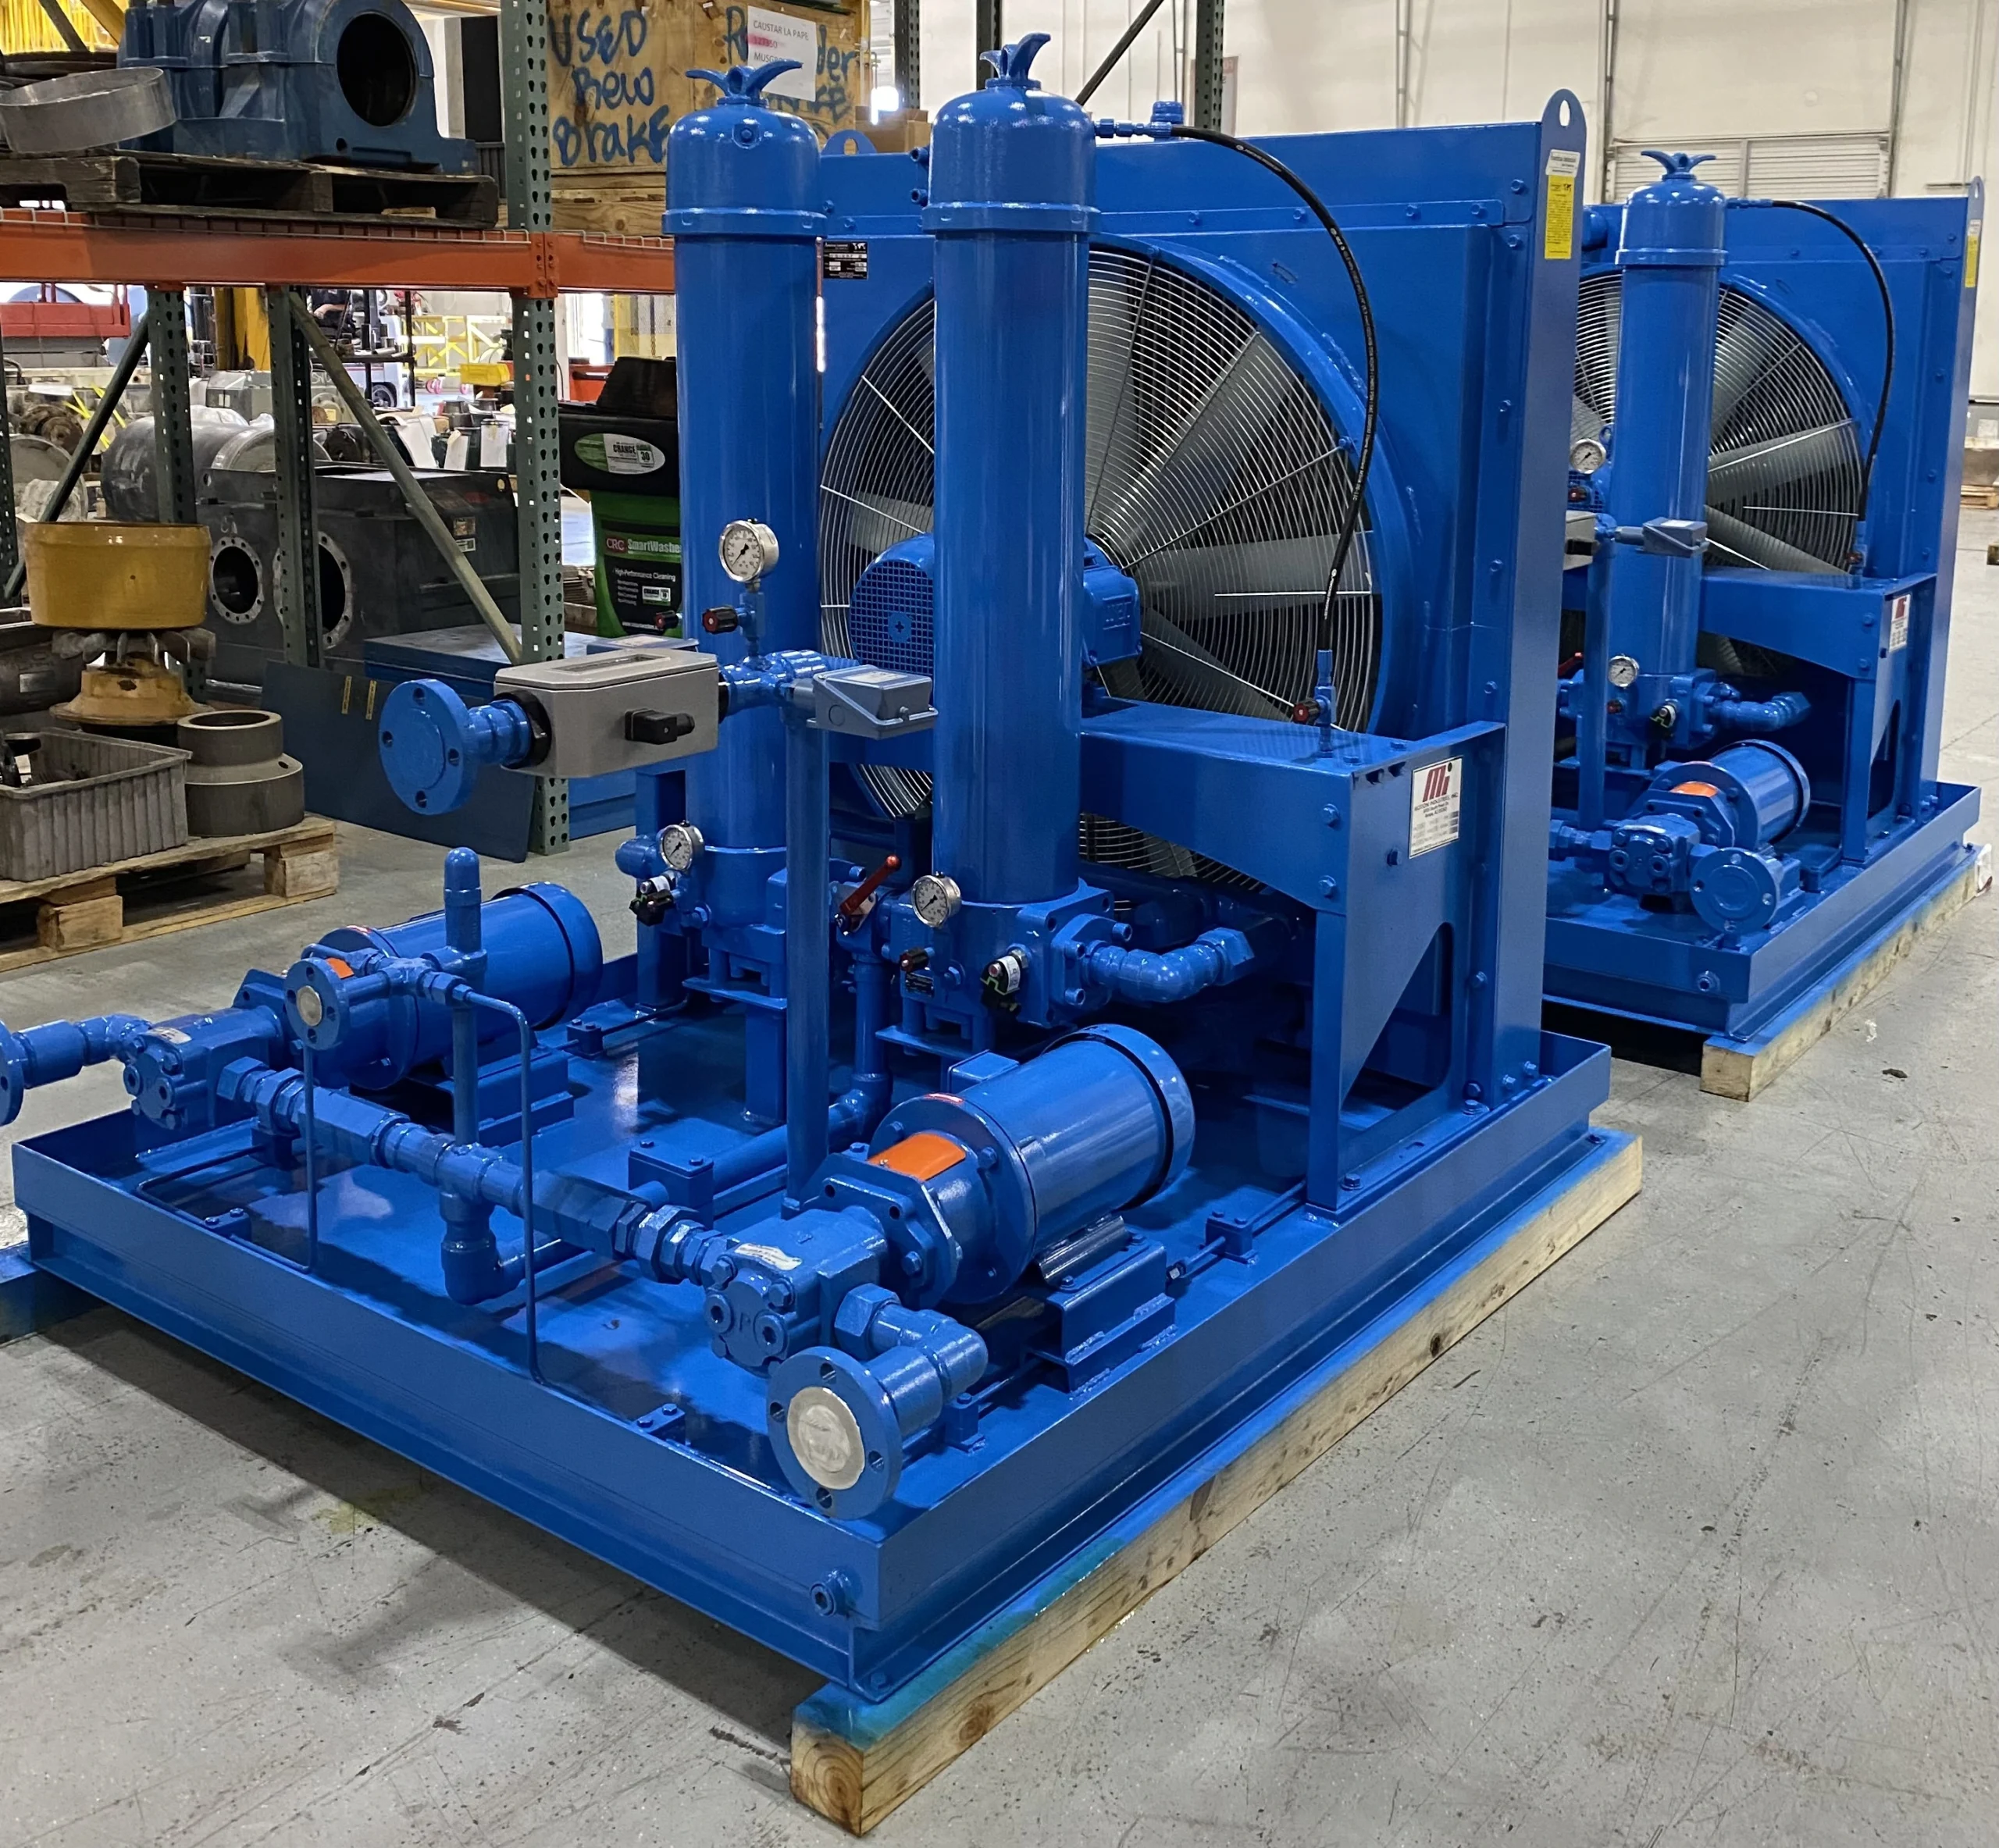 Two large custom-built hydraulic systems freshly powder coated blue sitting on pallets in remanufacture facility